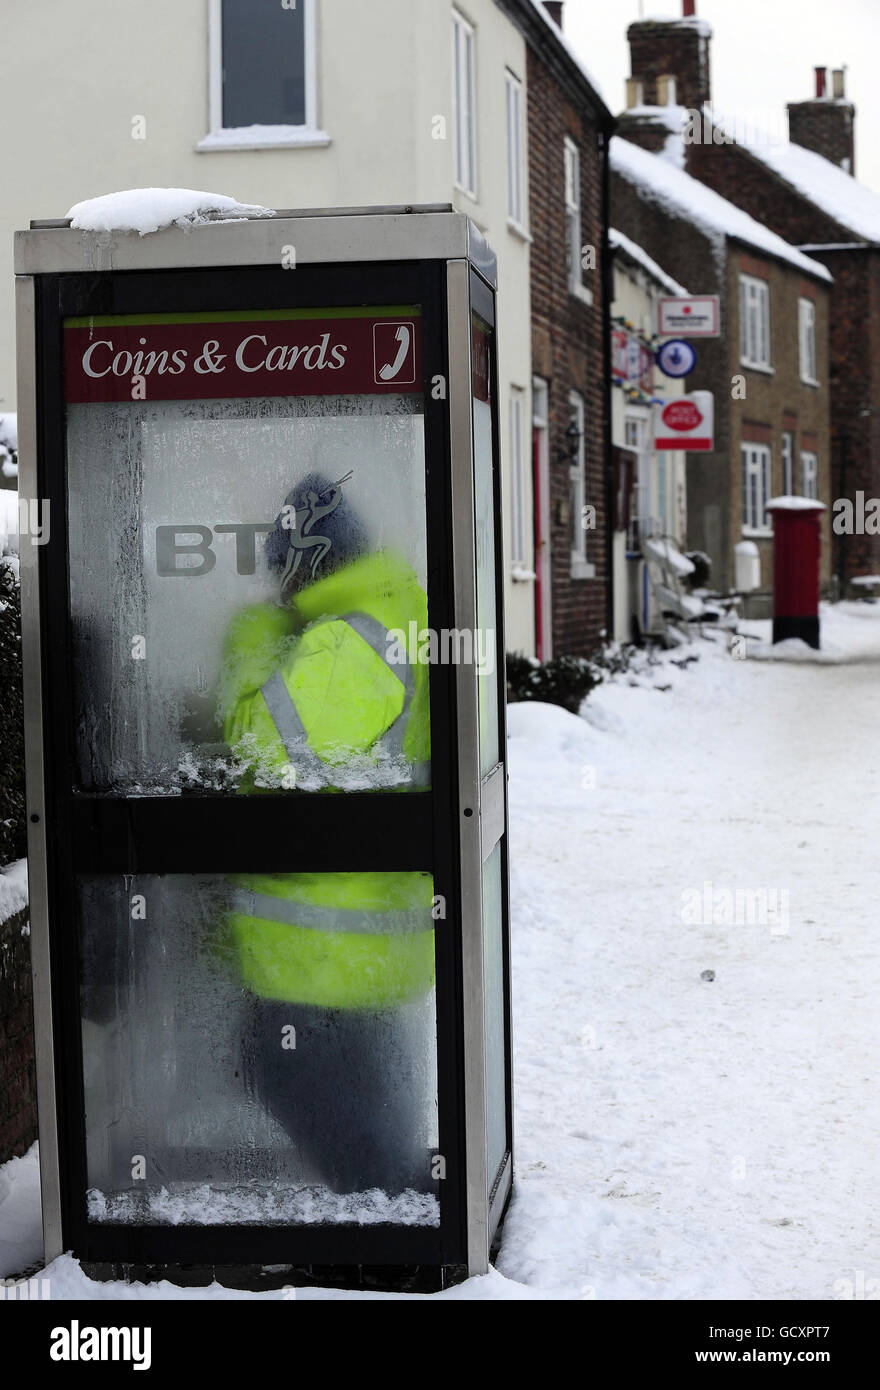 A man uses a telephone box in Topcliffe, near Thirsk in North Yorkshire. The village recorded a temperature of -19C earlier today, the coldest temperature recorded in Yorkshire since records began. Stock Photo